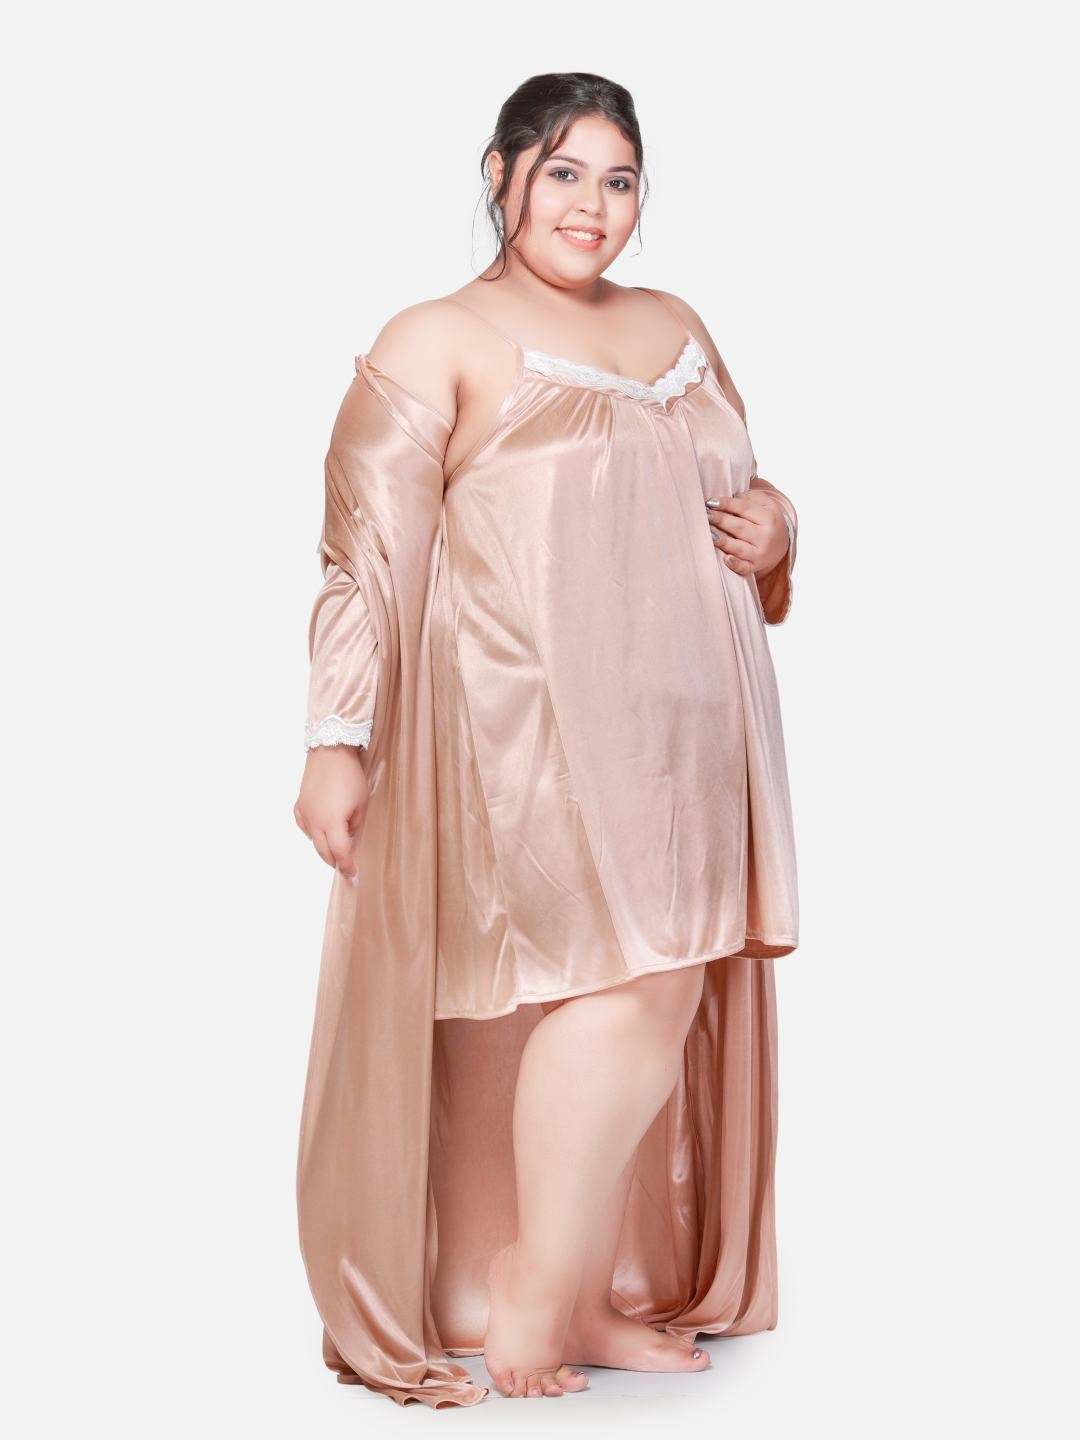 Plus Size Hot Two Piece Champagne Babydoll Night Dress for Women 302Ag